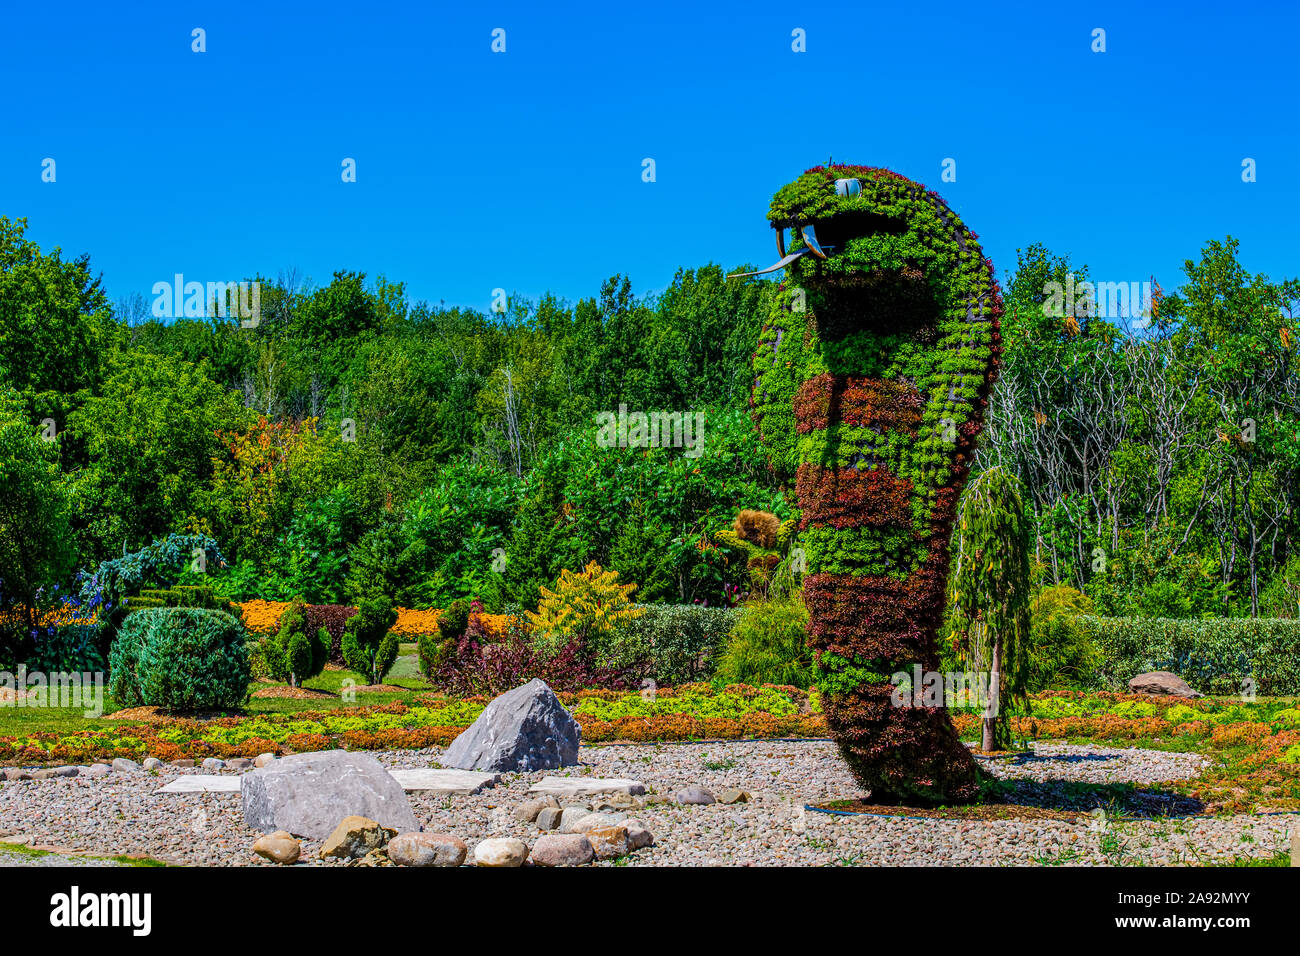 Plants with purple and green foliage created in the shape of a cobra; St Lazare, Quebec, Canada Stock Photo